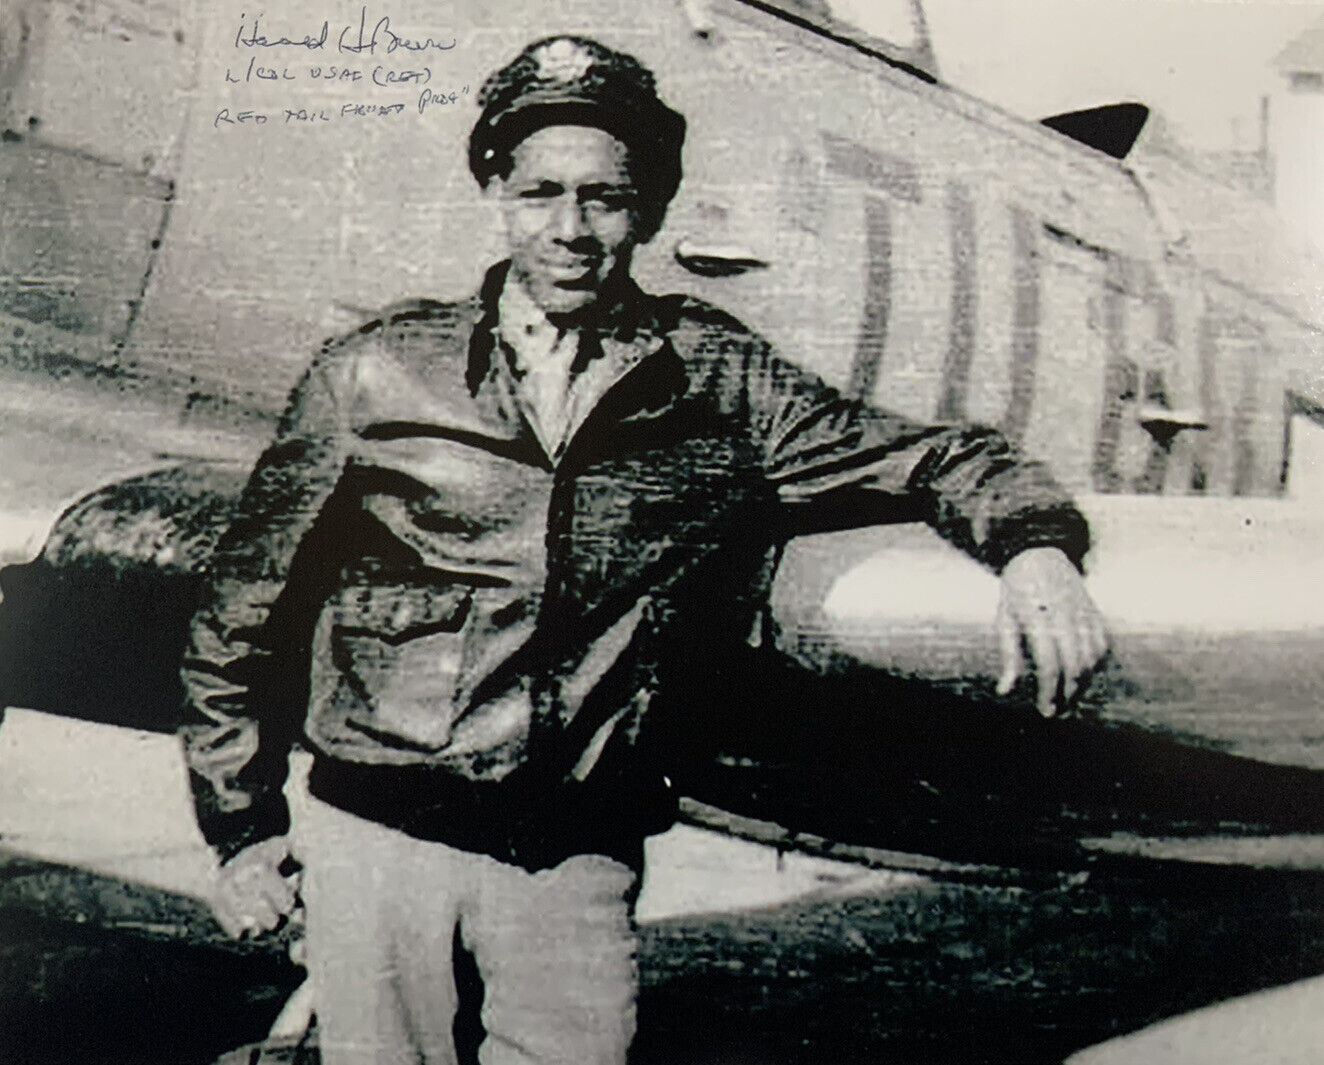 HAROLD BROWN HAND SIGNED 8x10 Photo Poster painting TUSKEGEE AIRMEN AUTOGRAPH AUTHENTIC